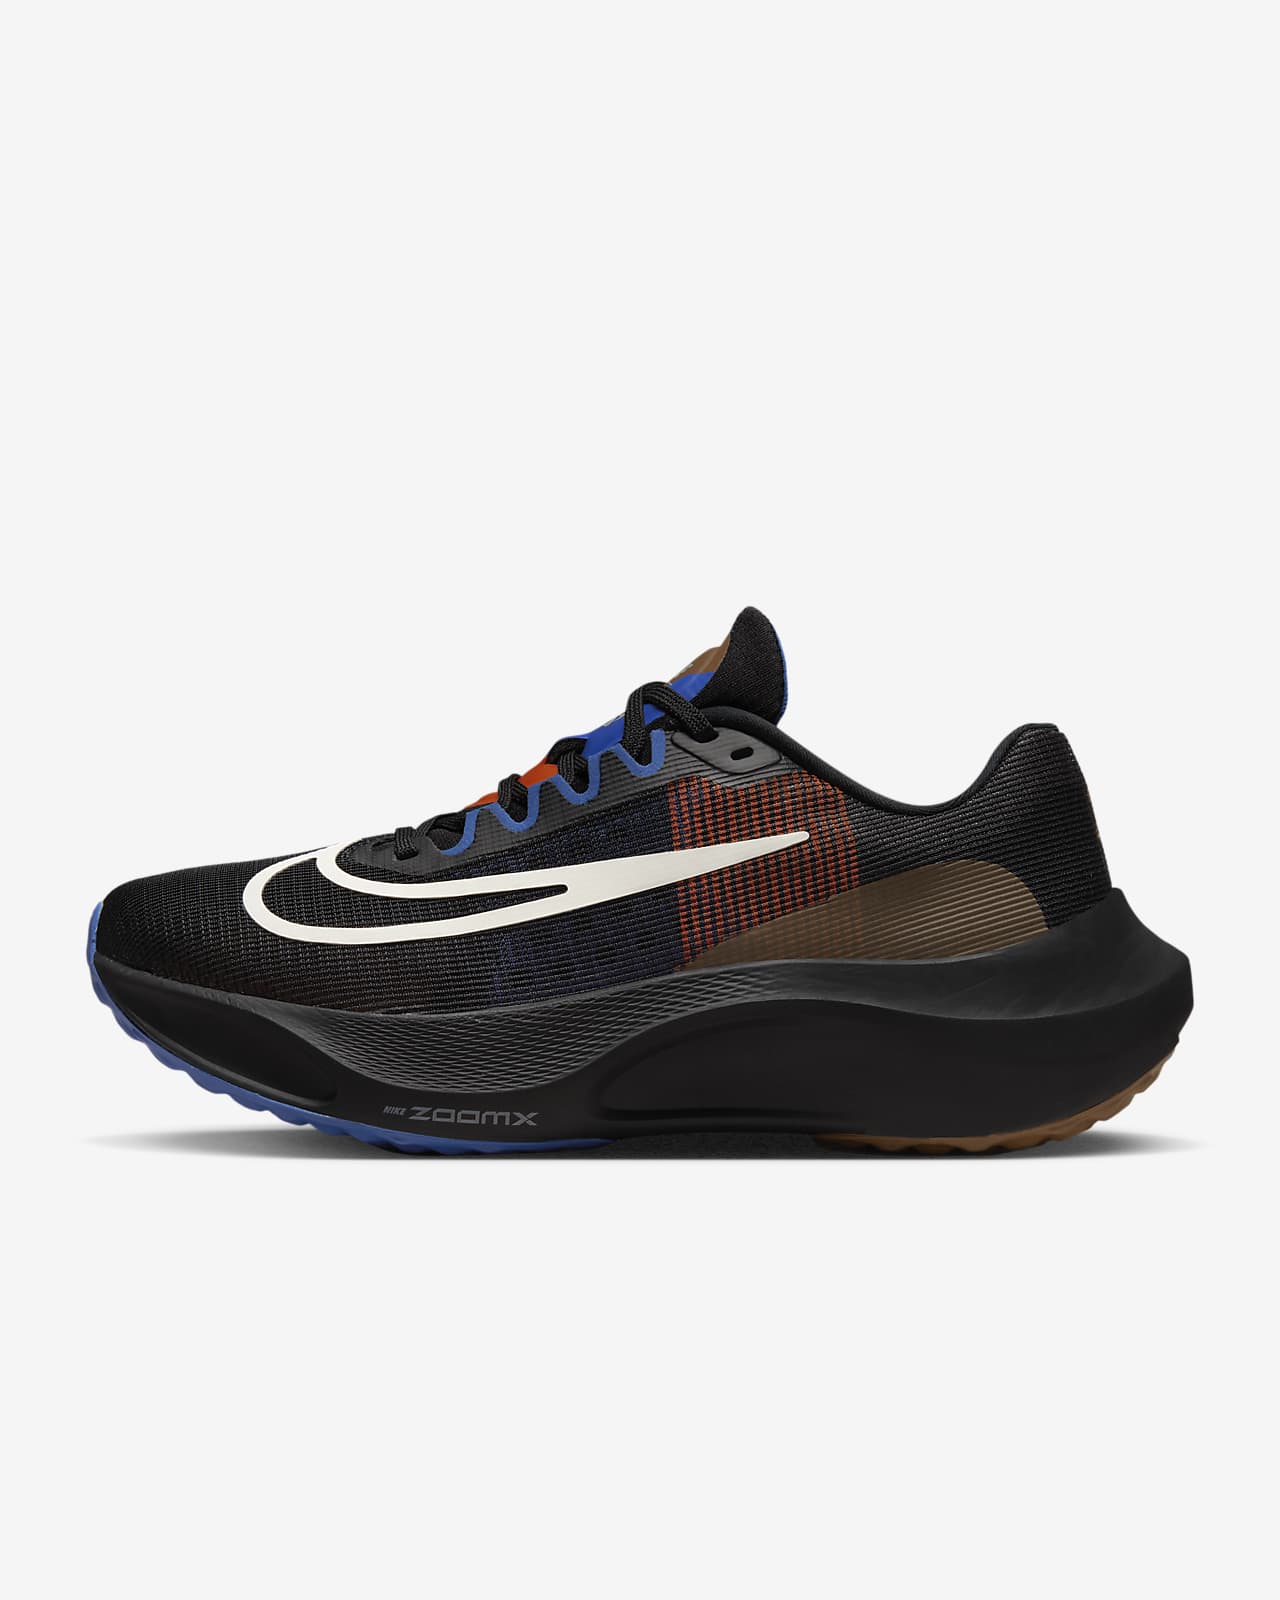 Nike Zoom Fly 5 A.I.R. Hola Lou Men's Road Running Shoes